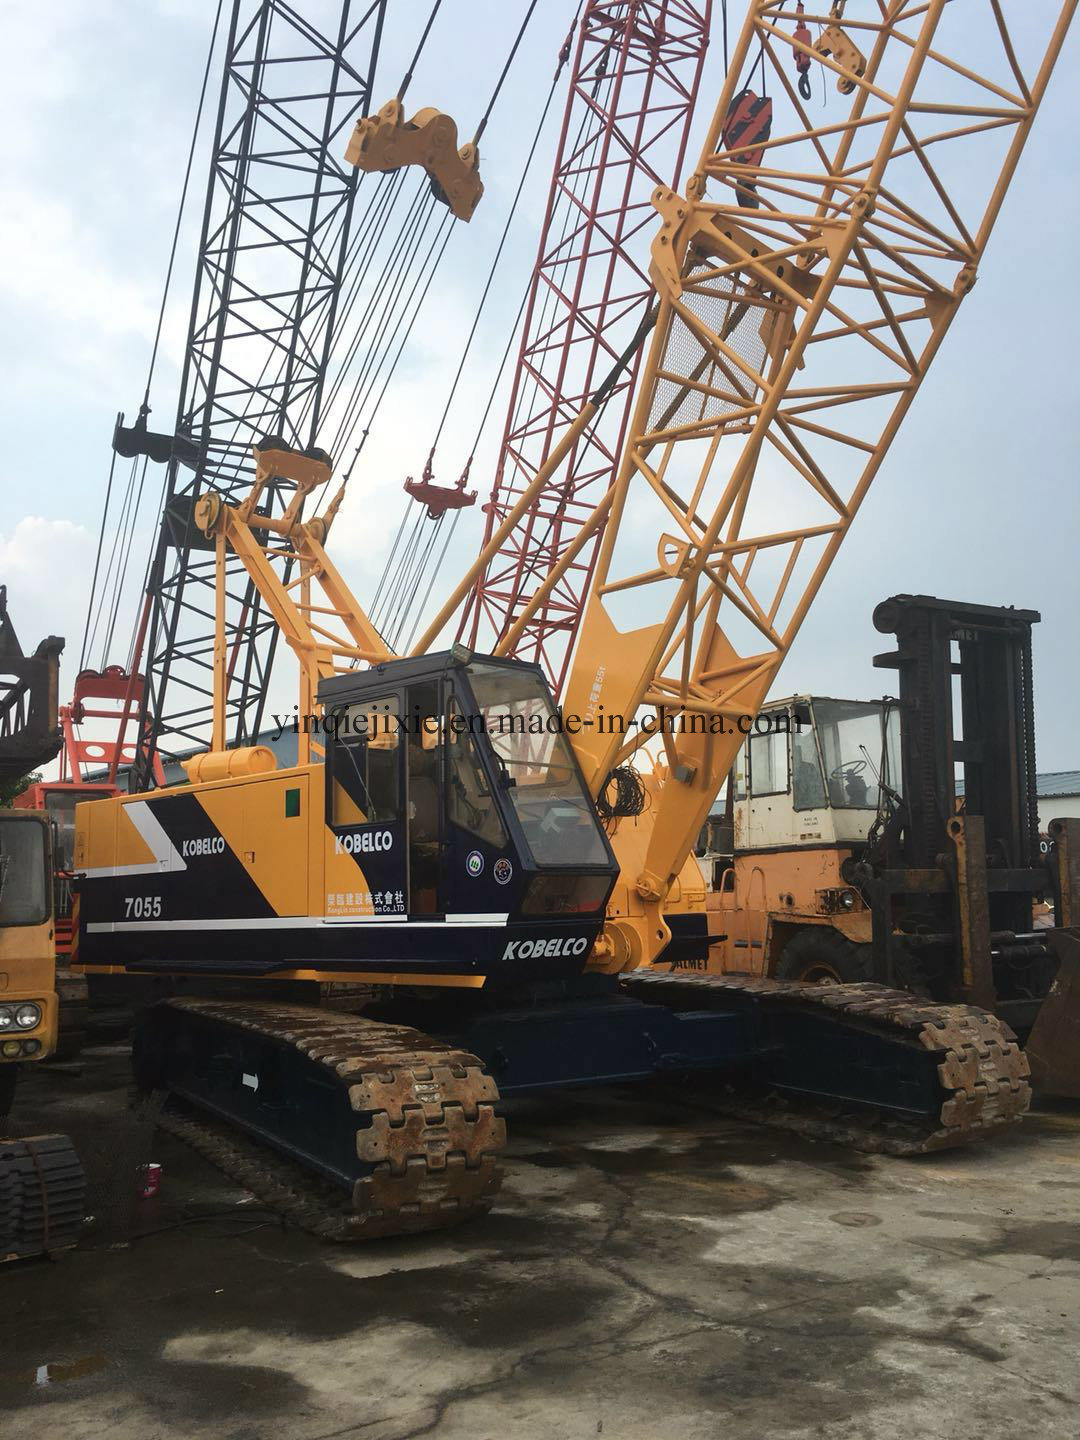 Used Kobelco 7055 55t Crane in Hot Sale with Good Condition, Kobelco 7055 55t Crane